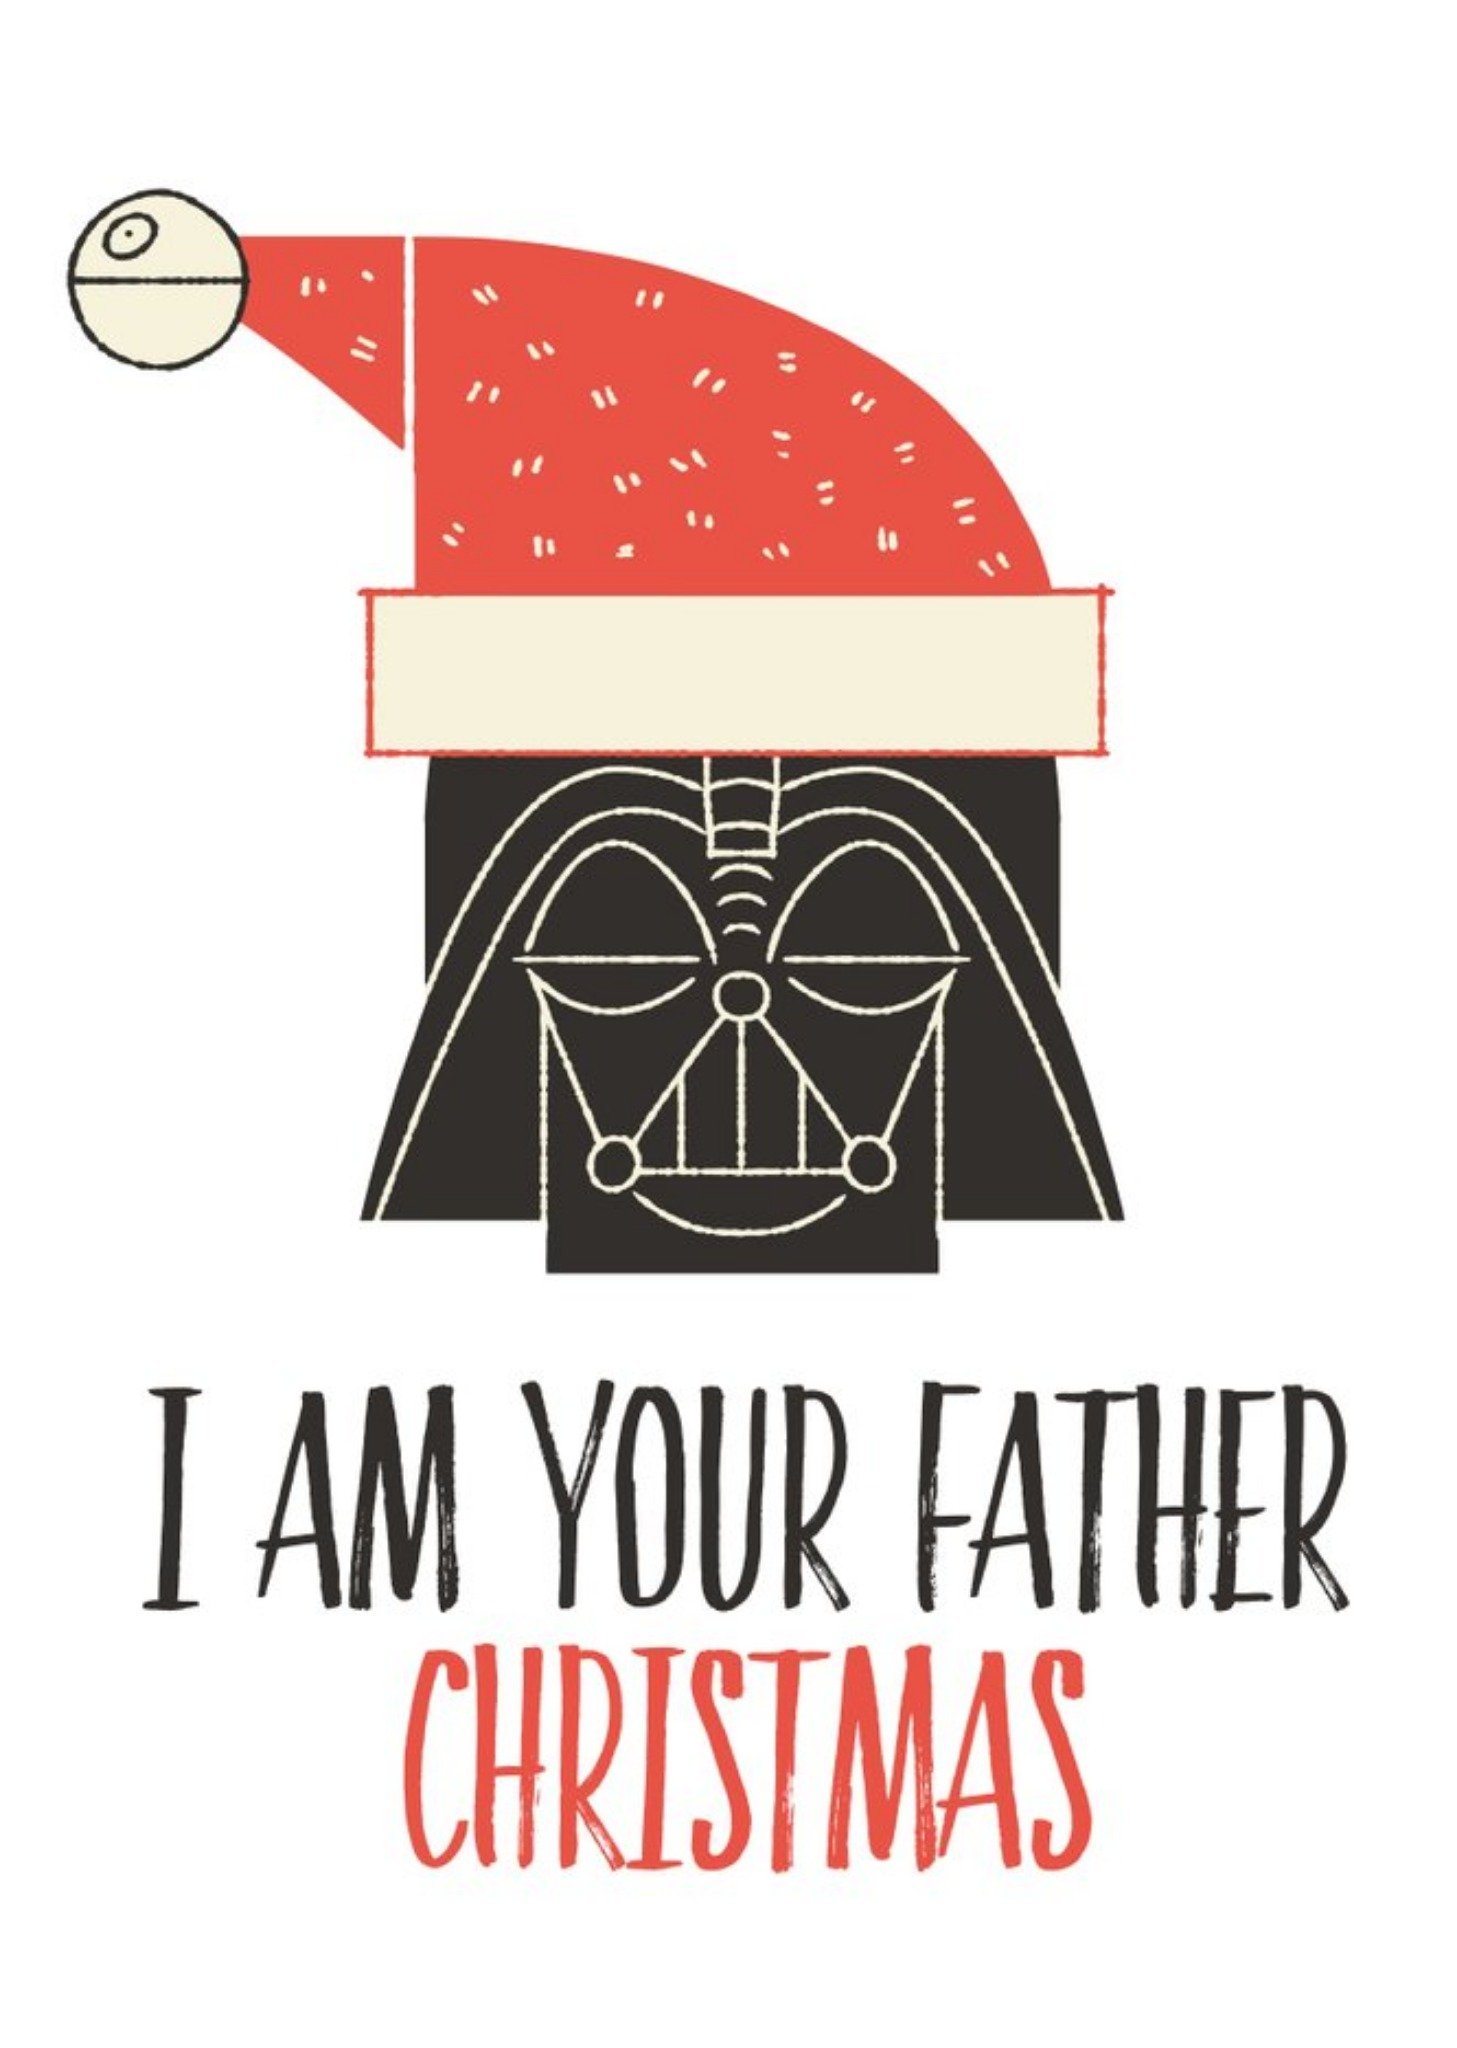 Disney Star Wars Funny Darth Vador I Am Your Father Christmas Card, Large